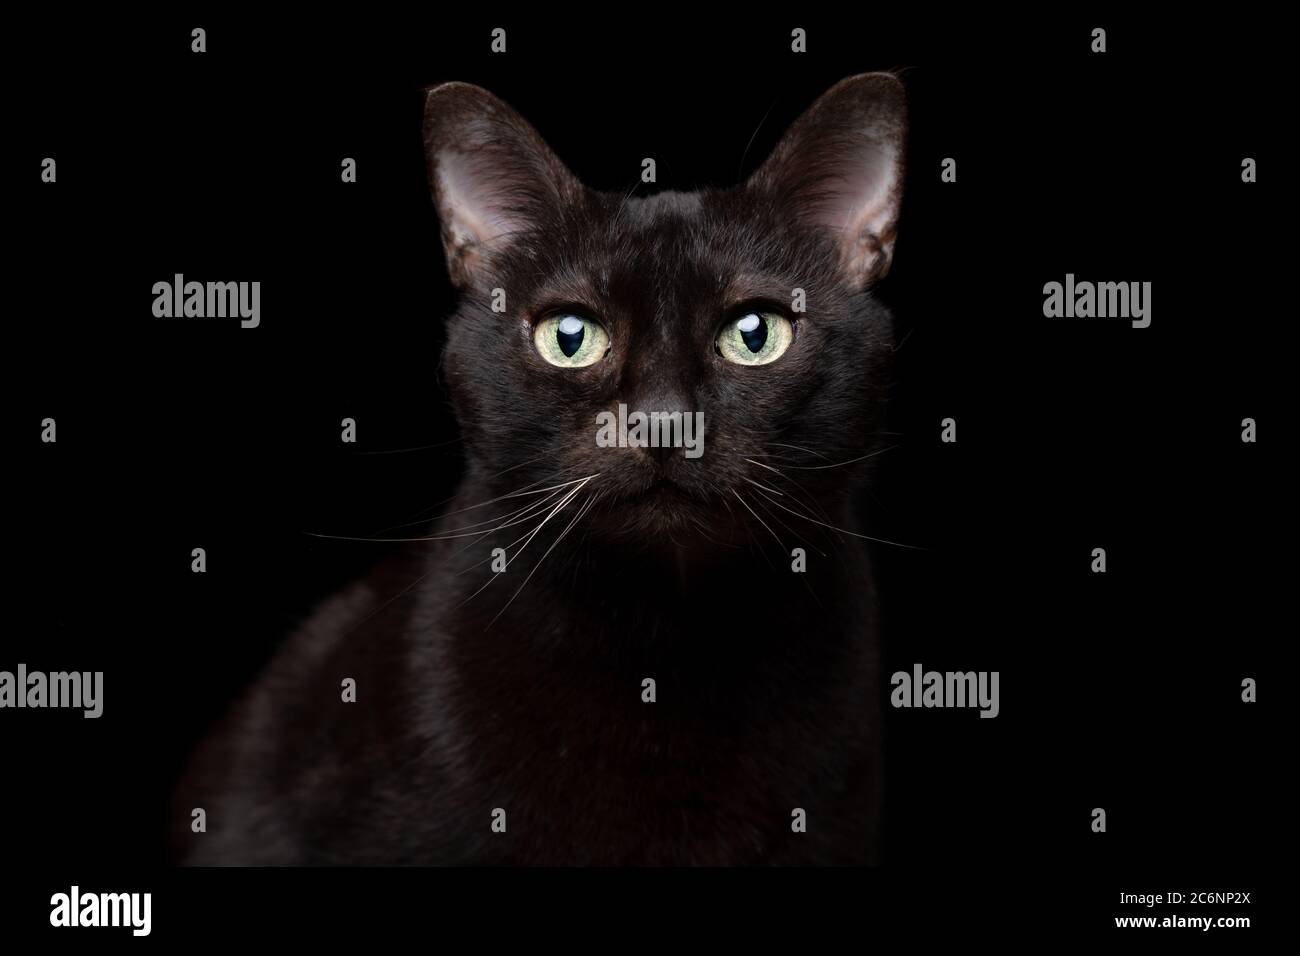 studio portrait of a black cat on black background looking at camera Stock Photo